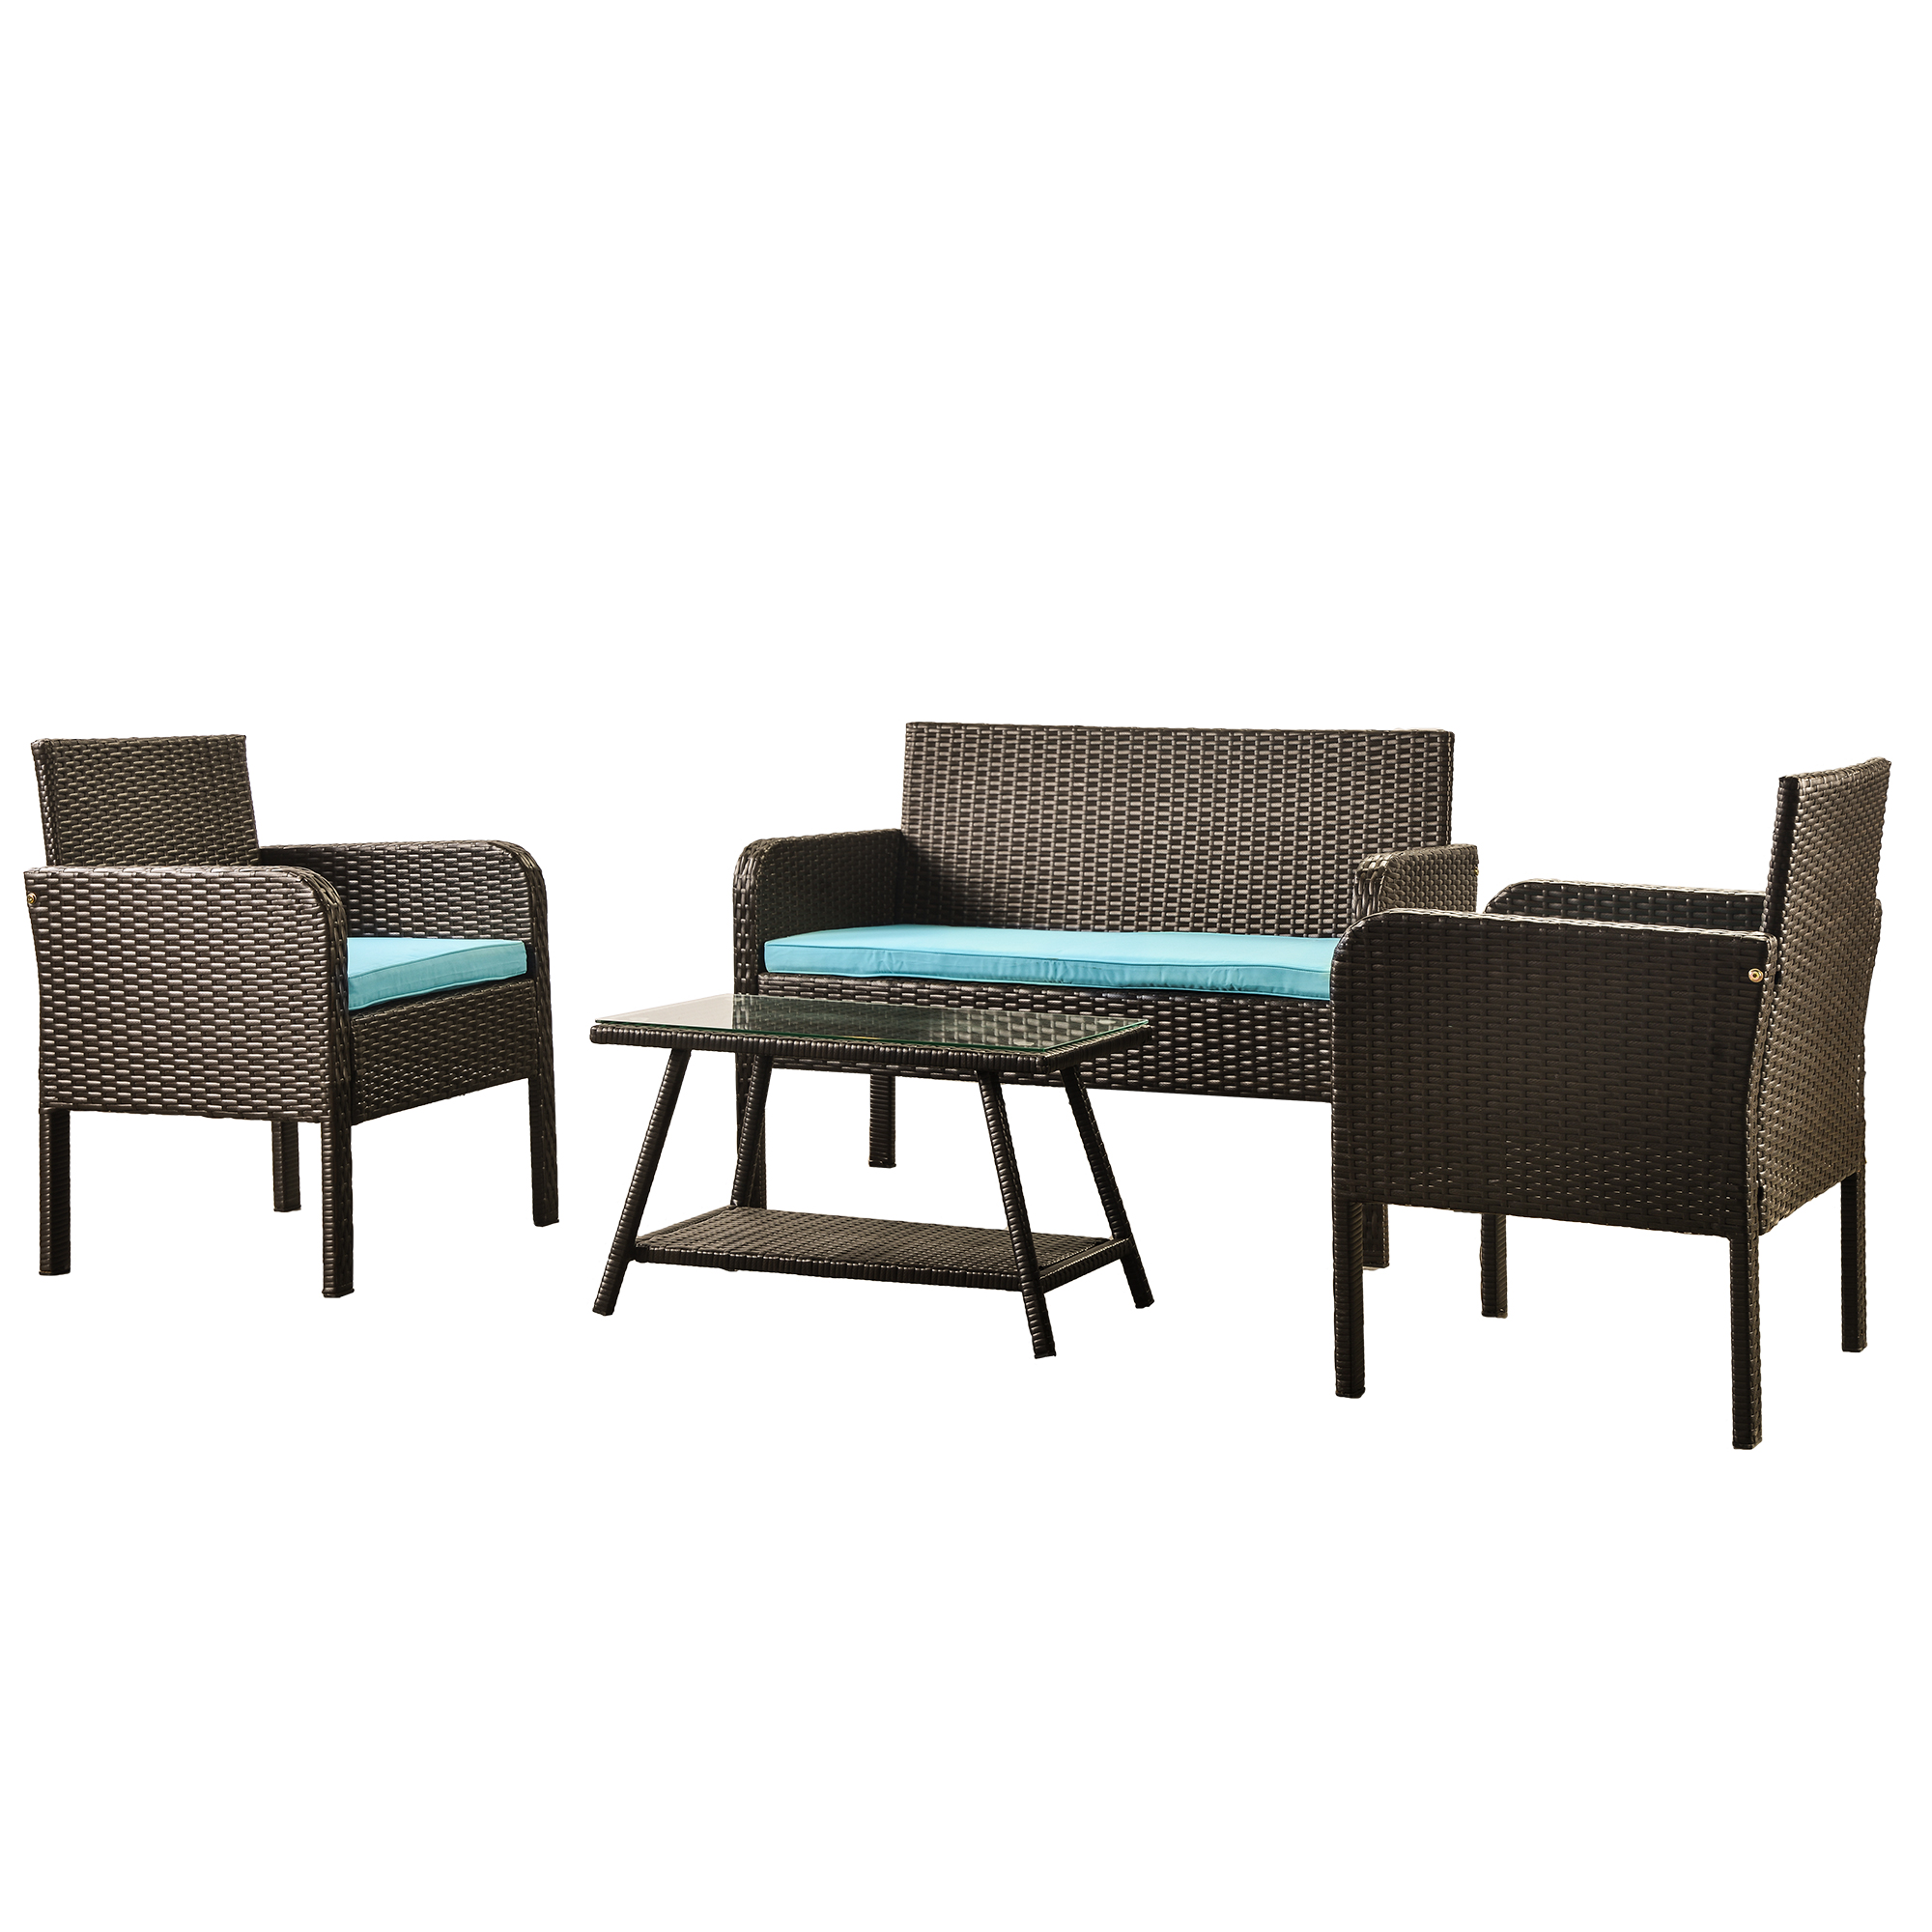 Patio Furniture Set, 4-Piece Outdoor Indoor Use Bistro Wicker Chairs Conversation Sets, Leisure Rattan Chair Sets with 1 Loveseat, 2 Single Chairs and Glass Coffee Table, Outdoor Armchair Seat, S1784 - image 1 of 7